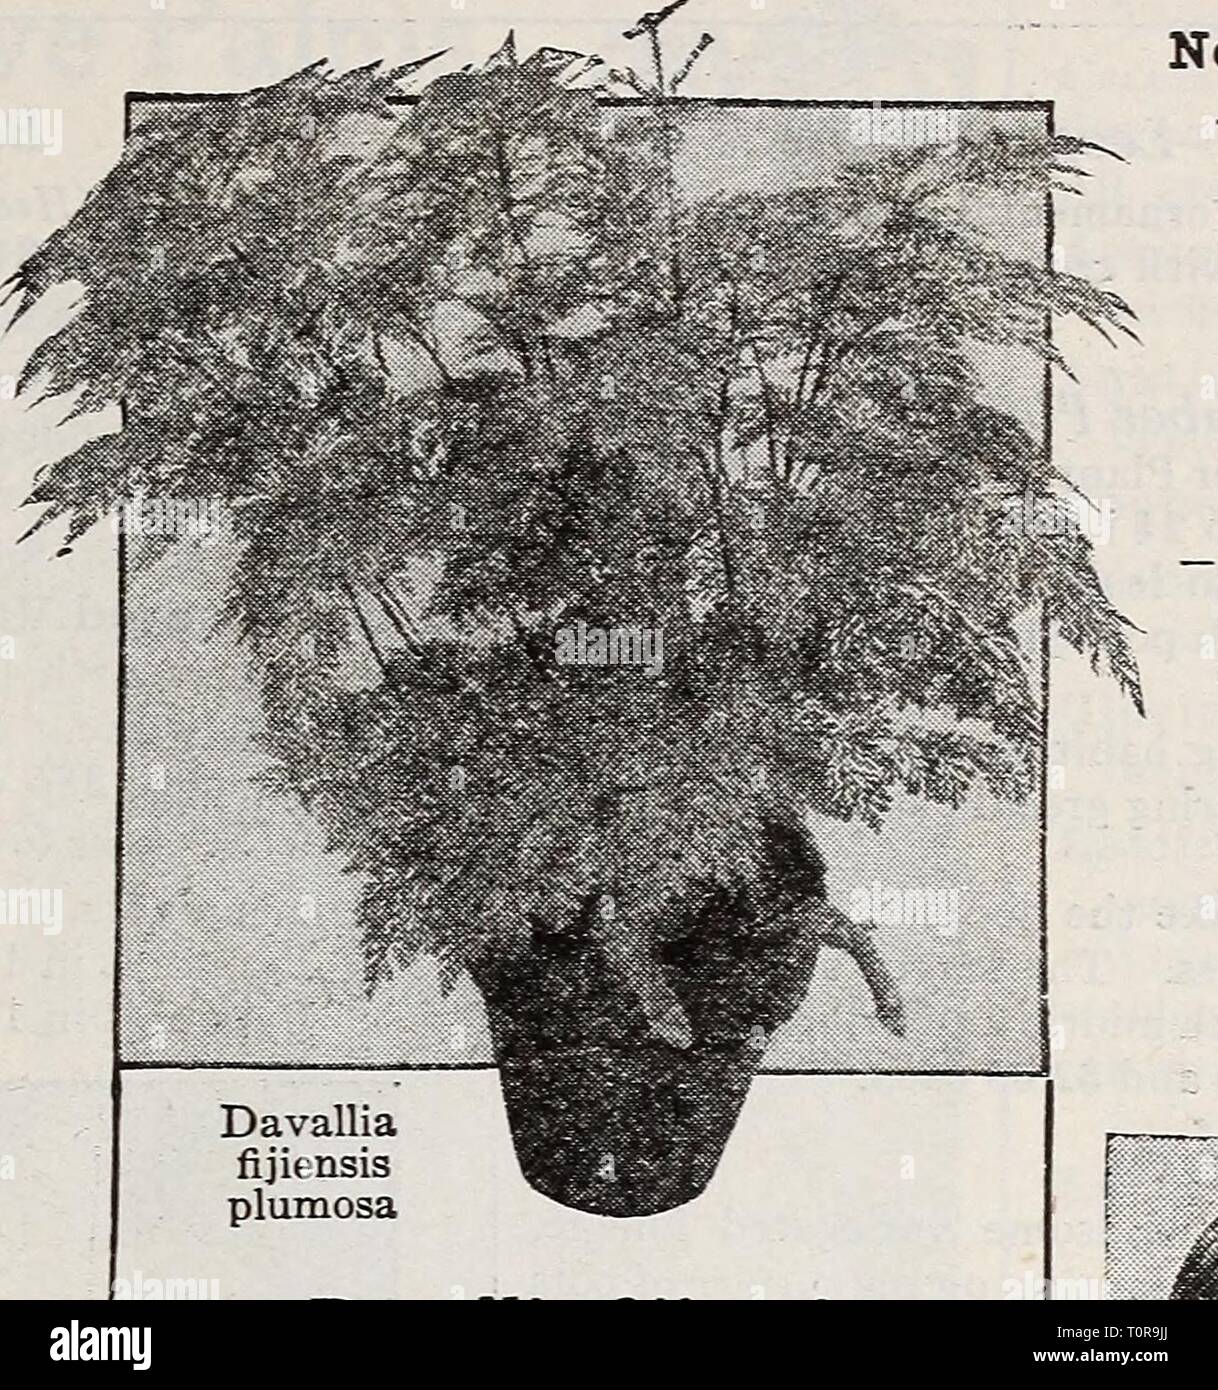 Dreer's bulbs plants, shrubs and Dreer's bulbs plants, shrubs and seeds for fall planting : autumn 1937  dreersbulbsplant1937henr Year: 1937  Davallia fijiensis plumosa This is one of the ver}^ best house Ferns as it will stand the hot and dry atmosphere of most living rooms. It is a truly beautiful Fern of strong growth with attractive rich dark green fronds of heavy substance. Fine in pots but also widely grown in hanging baskets or as Fern balls. Its rhizomes often spread over the soil surface which adds to the inter- esting features of this plant. 3-inch pots 75c; 4-inch pots $1.00, each.  Stock Photo